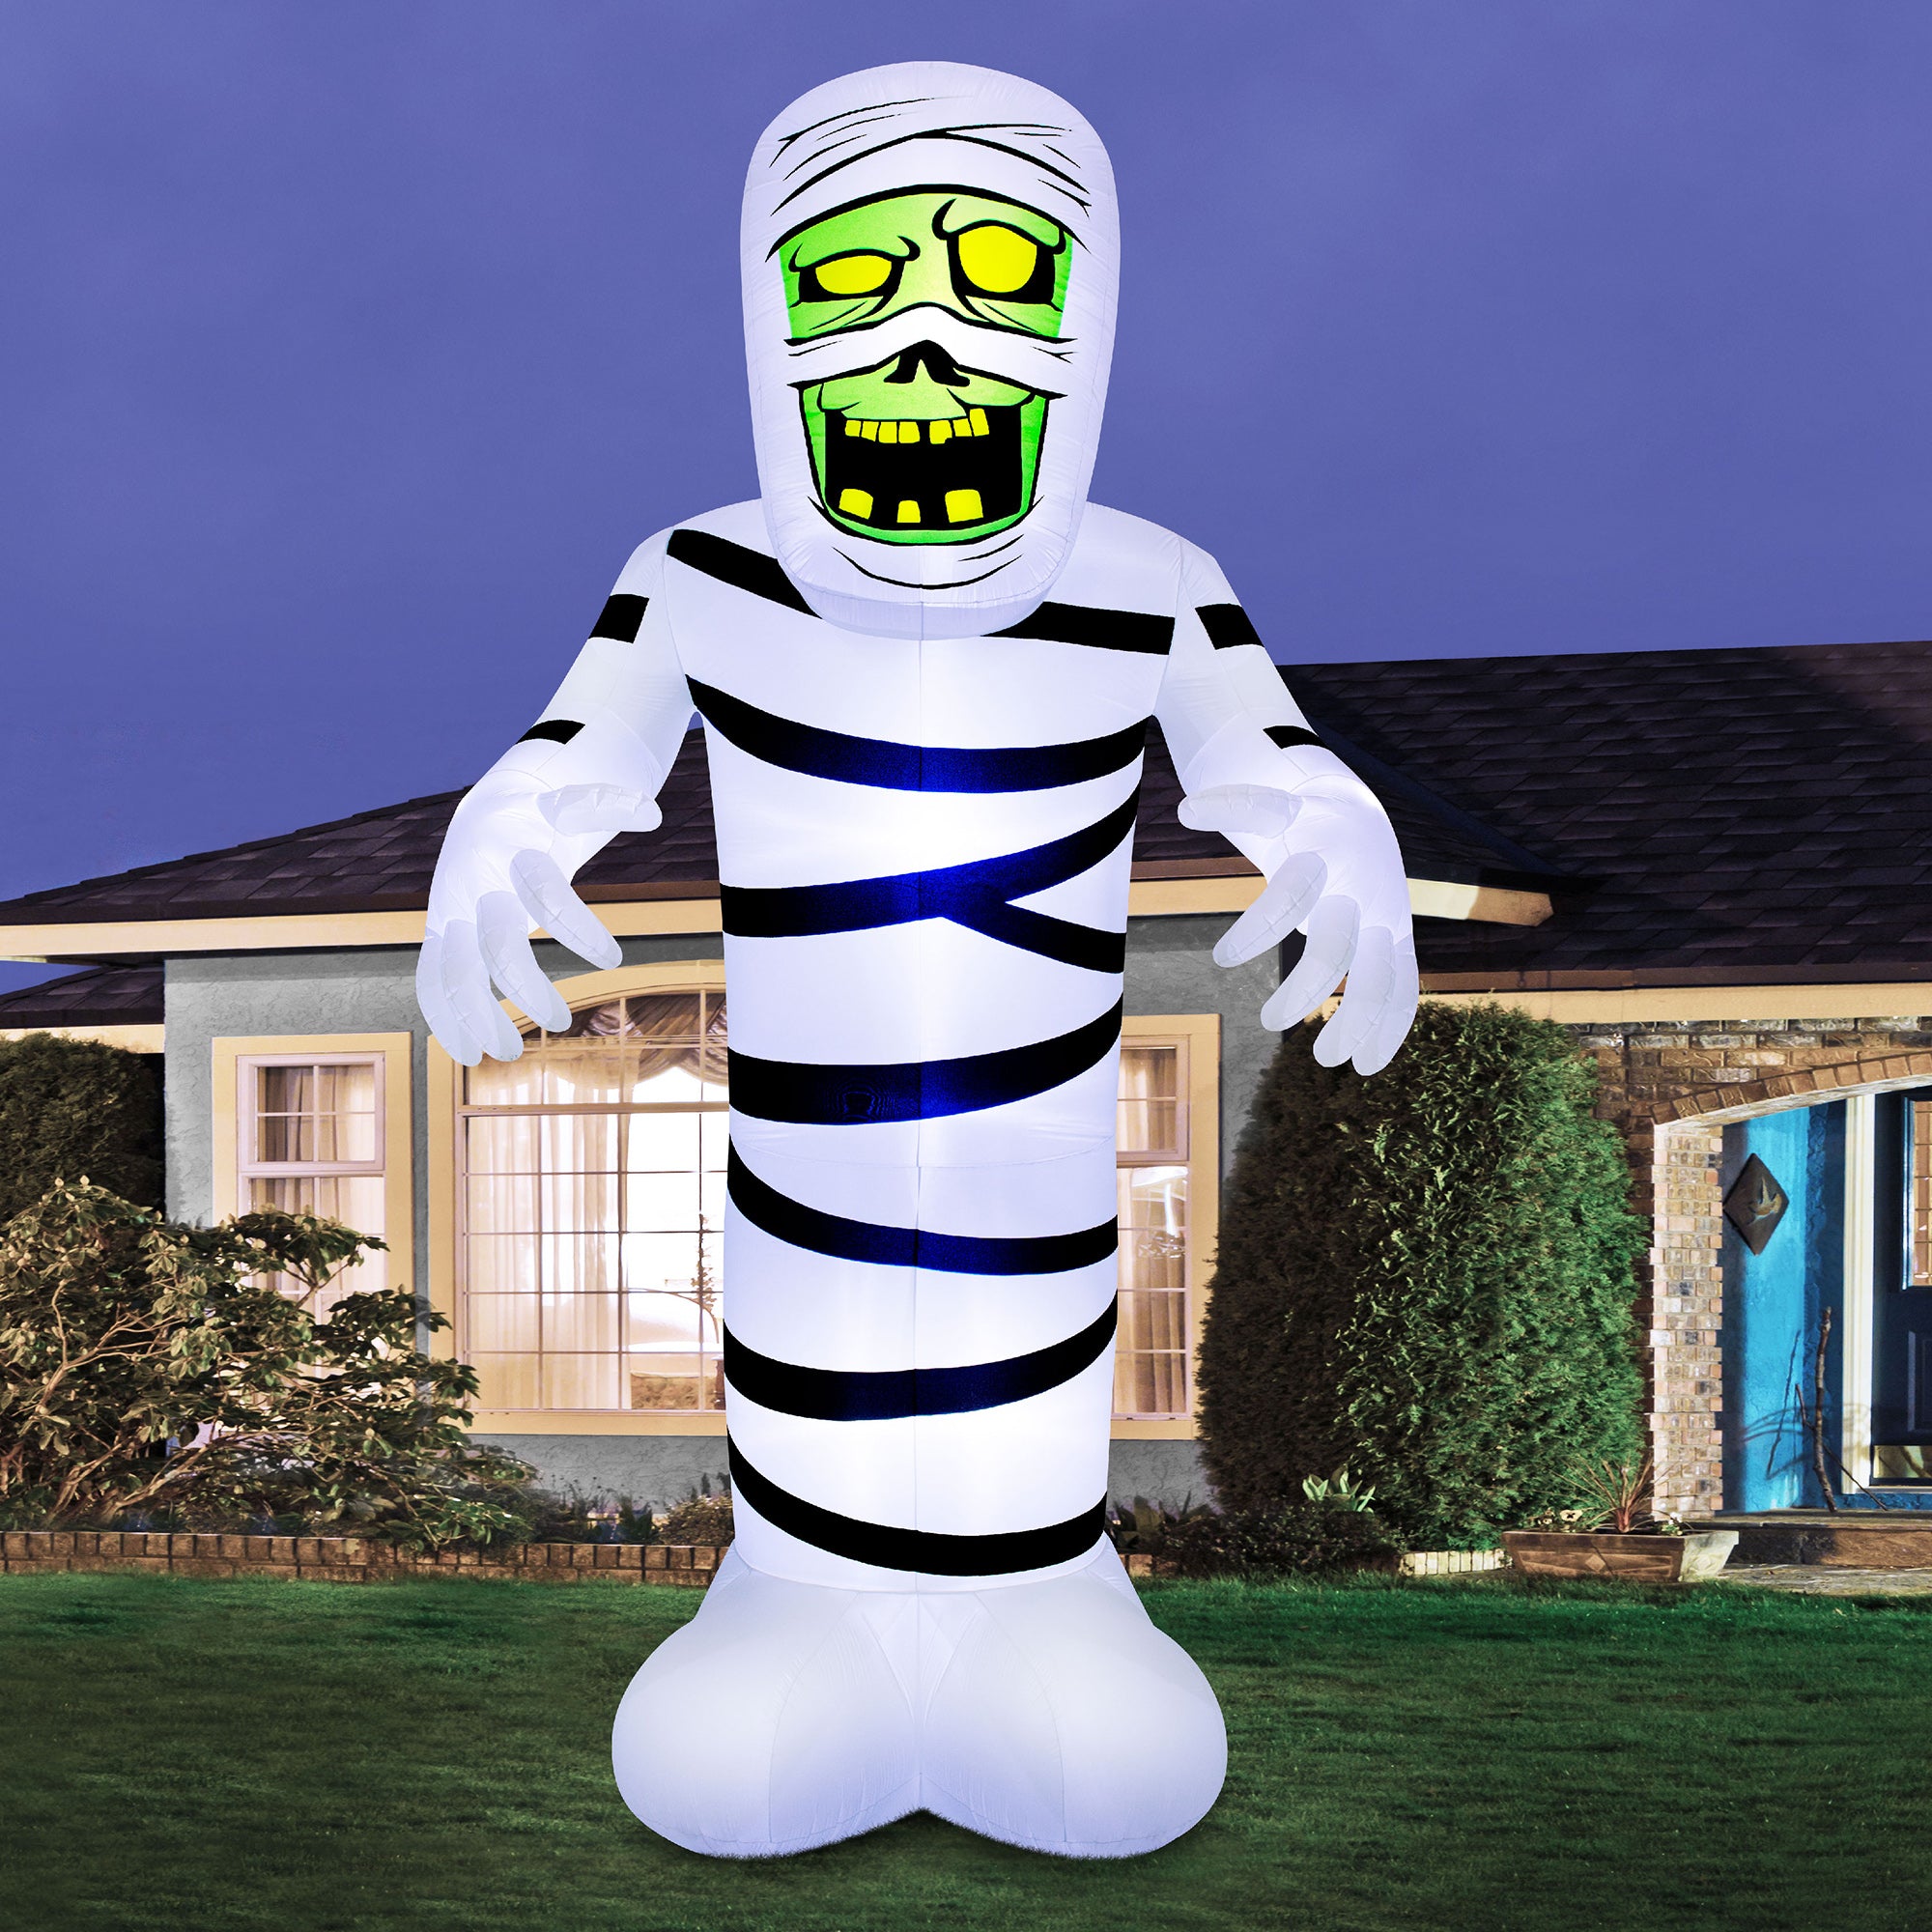 Occasions AIRFLOWZ INFLATABLE MUMMY  20FT, Tall, Multicolored